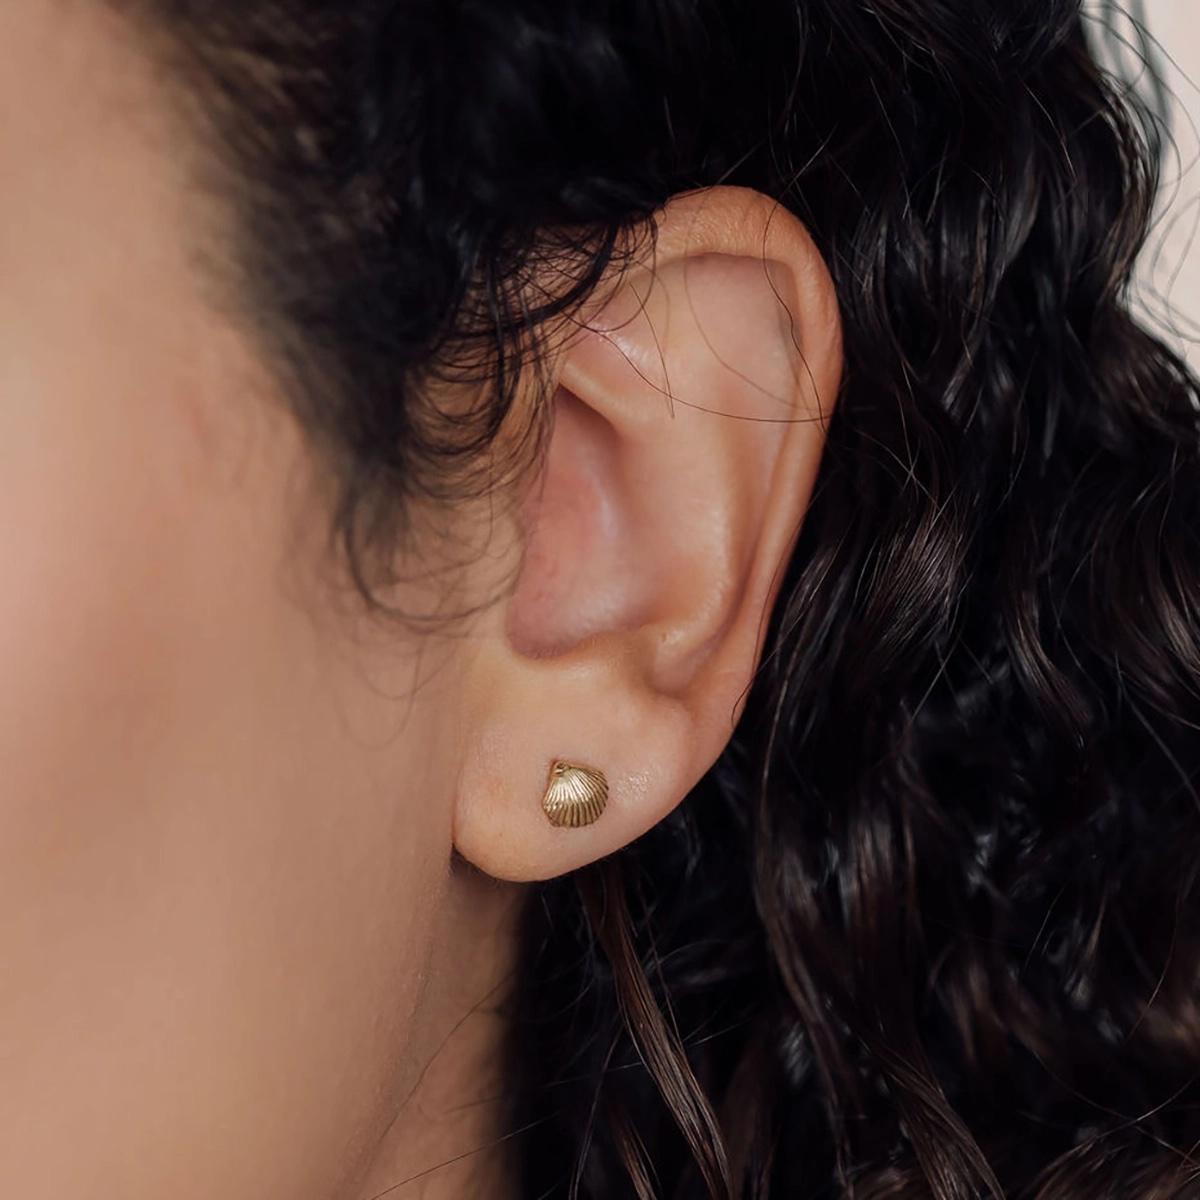 Transform the ordinary into extraordinary with these petite seashell studs, expertly crafted in 14k gold with intricate detail.
Capturing the essence of nature's artistry, each curve and contour beautifully mimics the delicate intricacies of natural